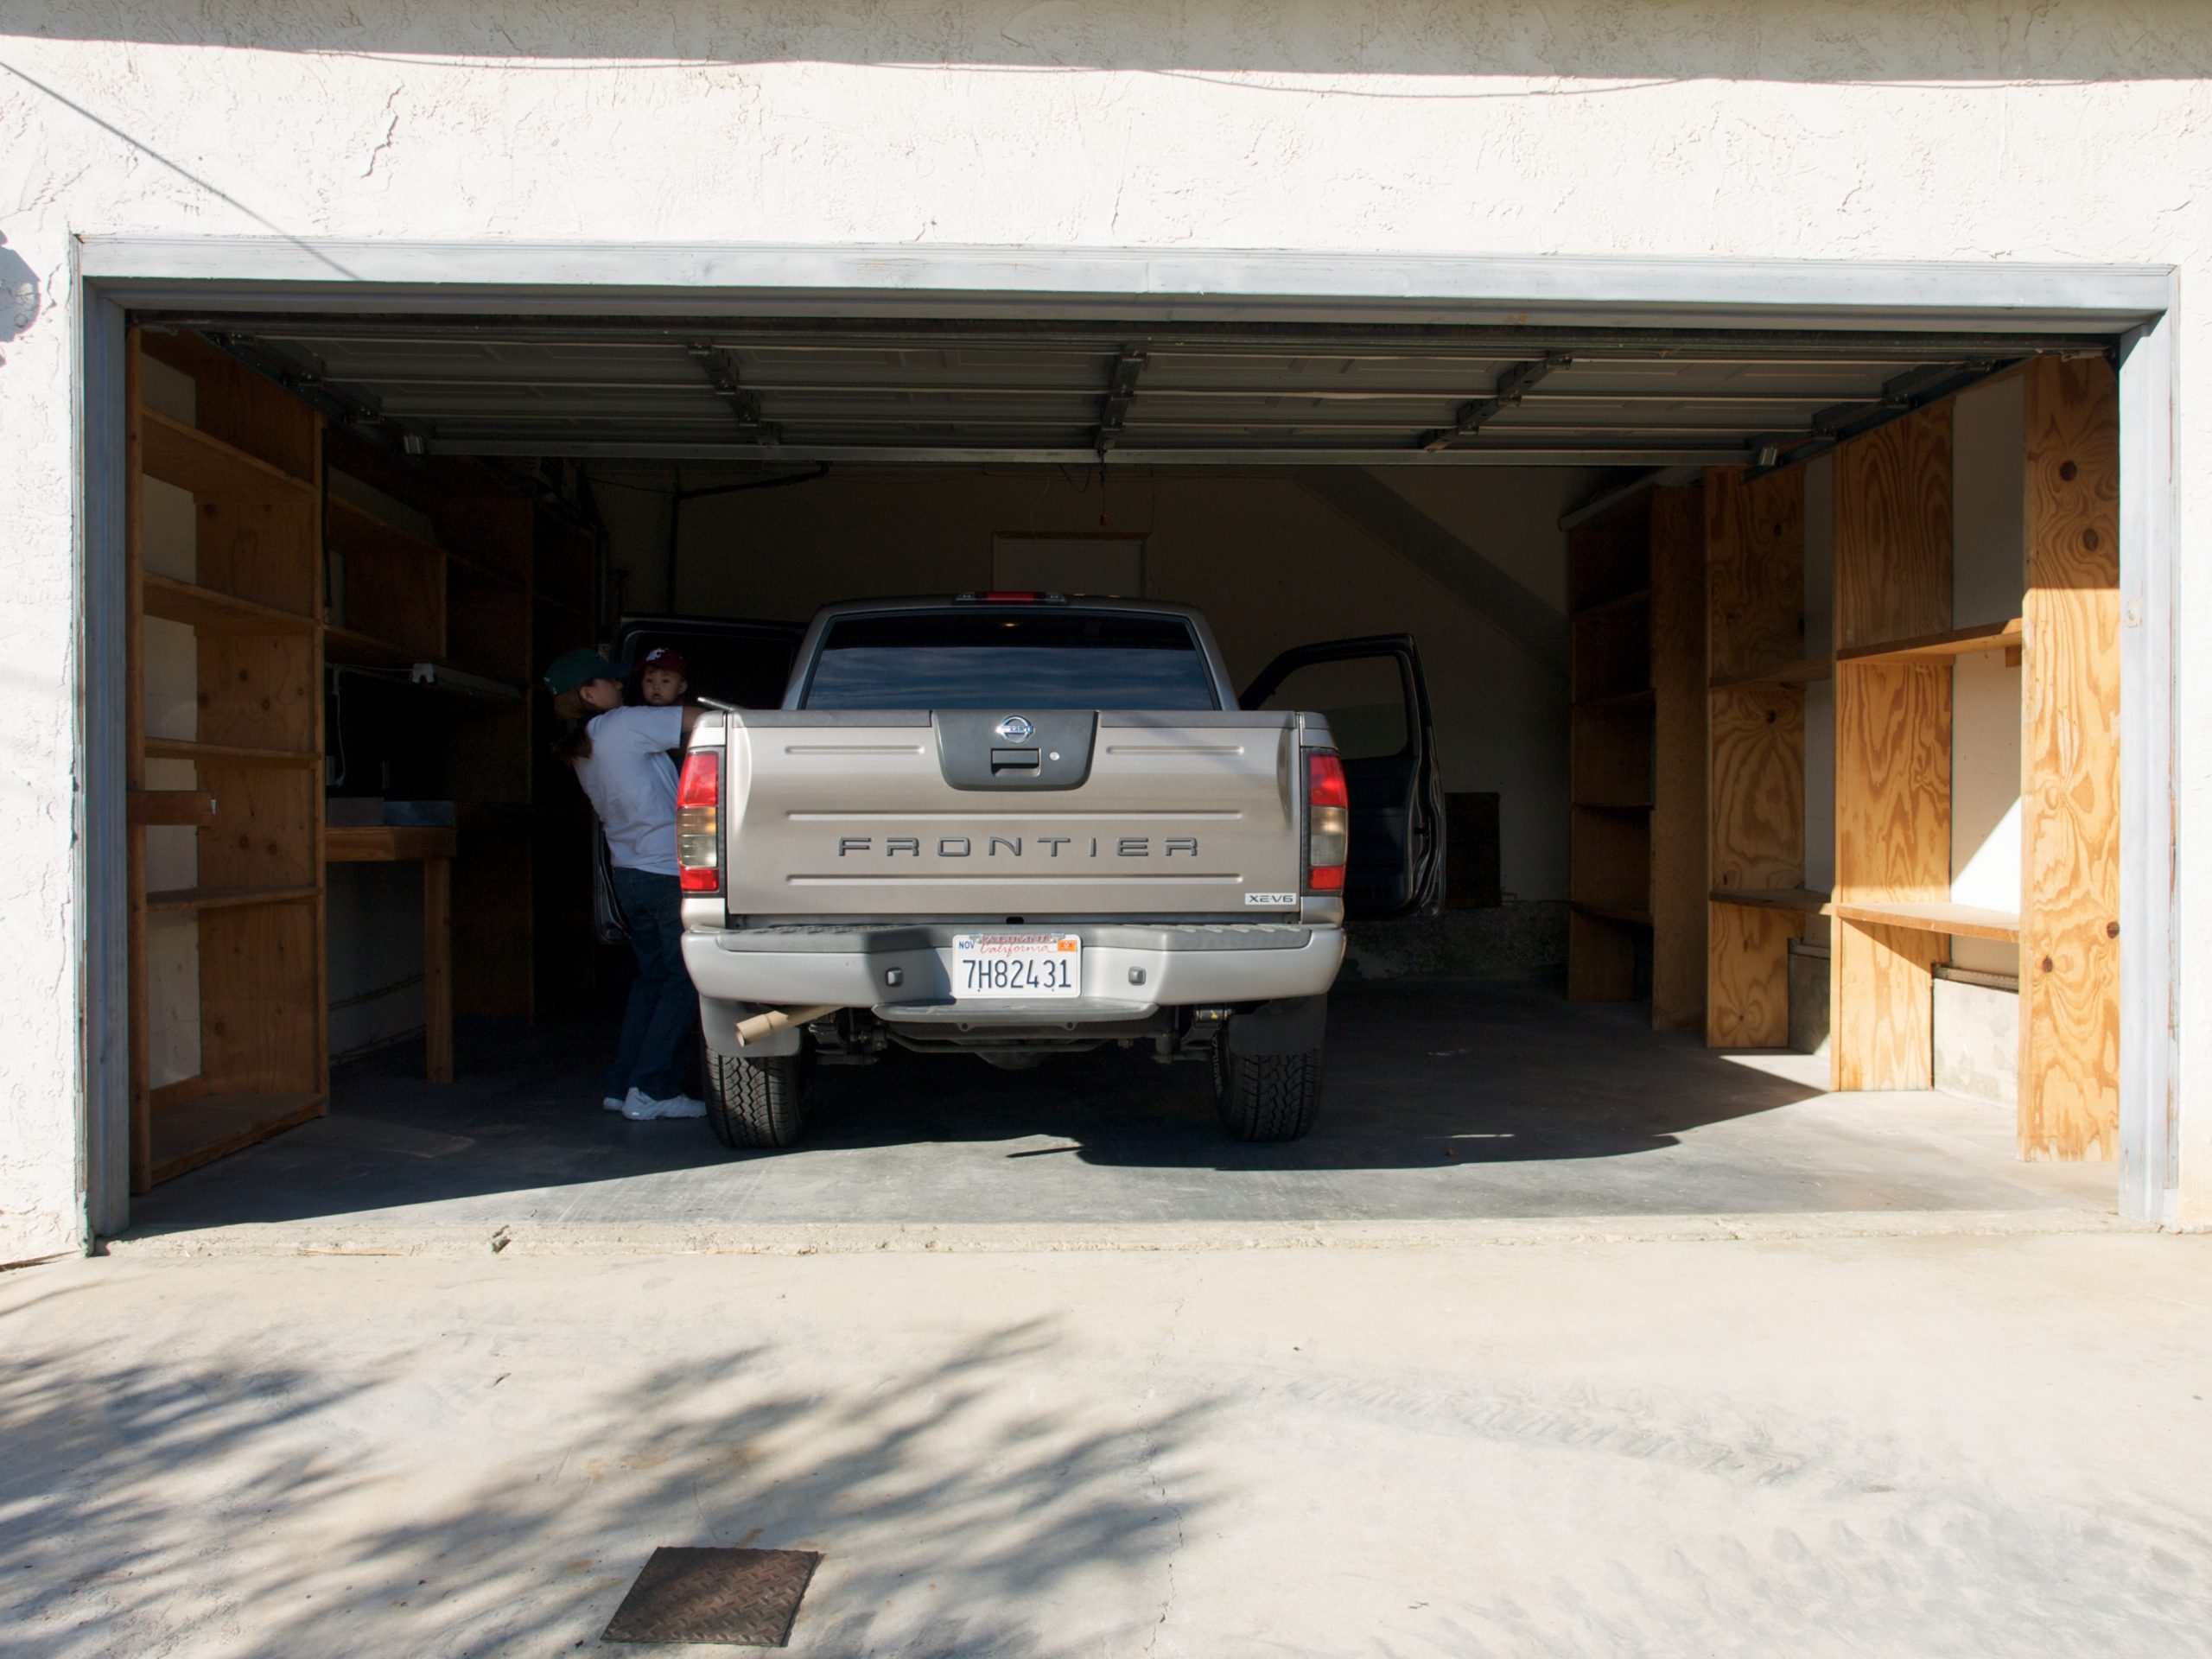 Storing the Car in Garage